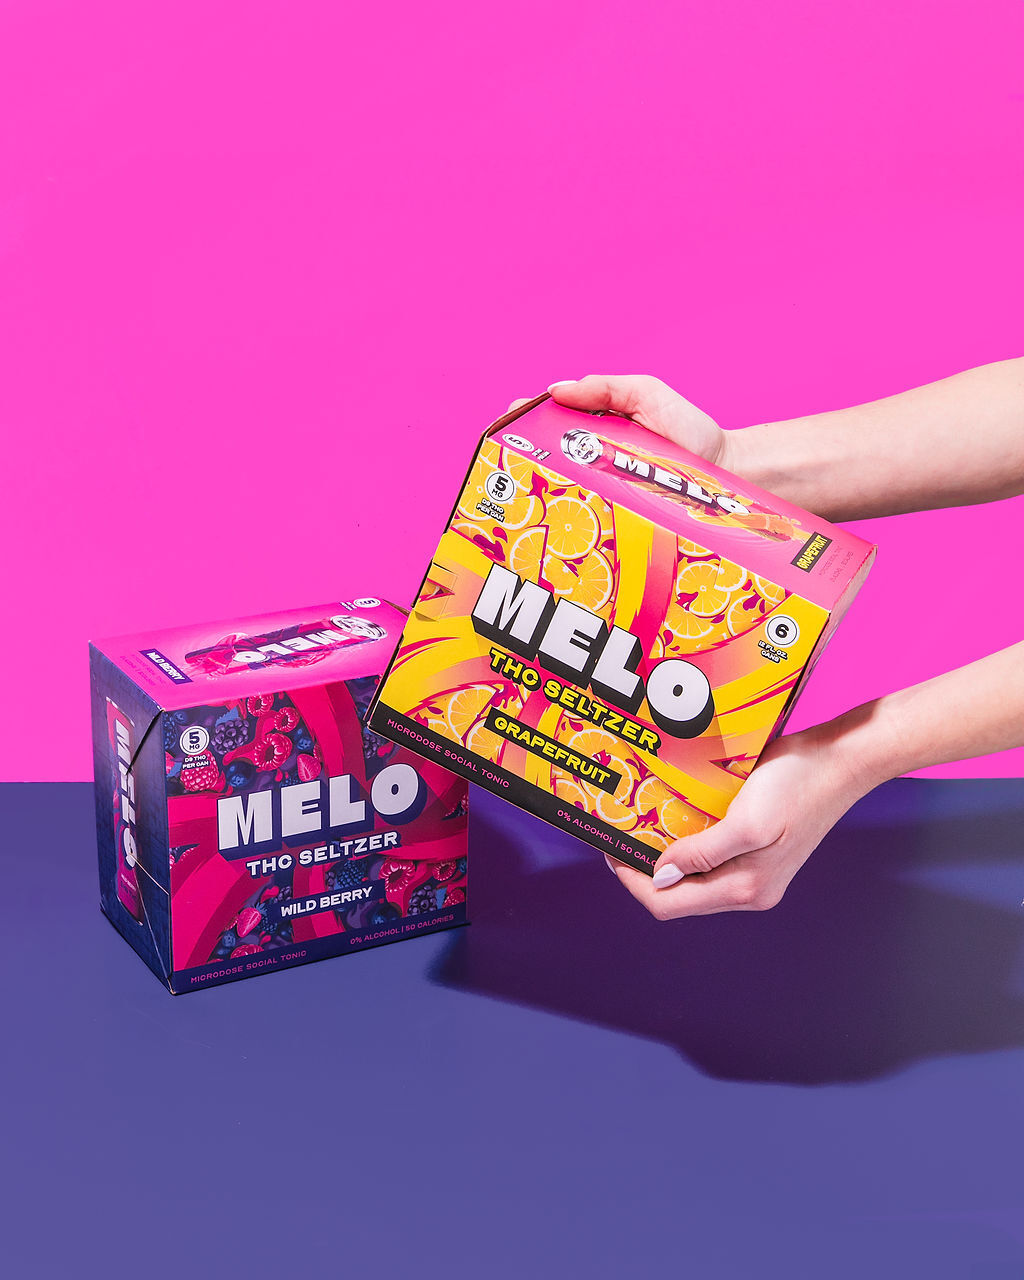 Melo’s THC Beverages: A Flavorful Journey to Bliss